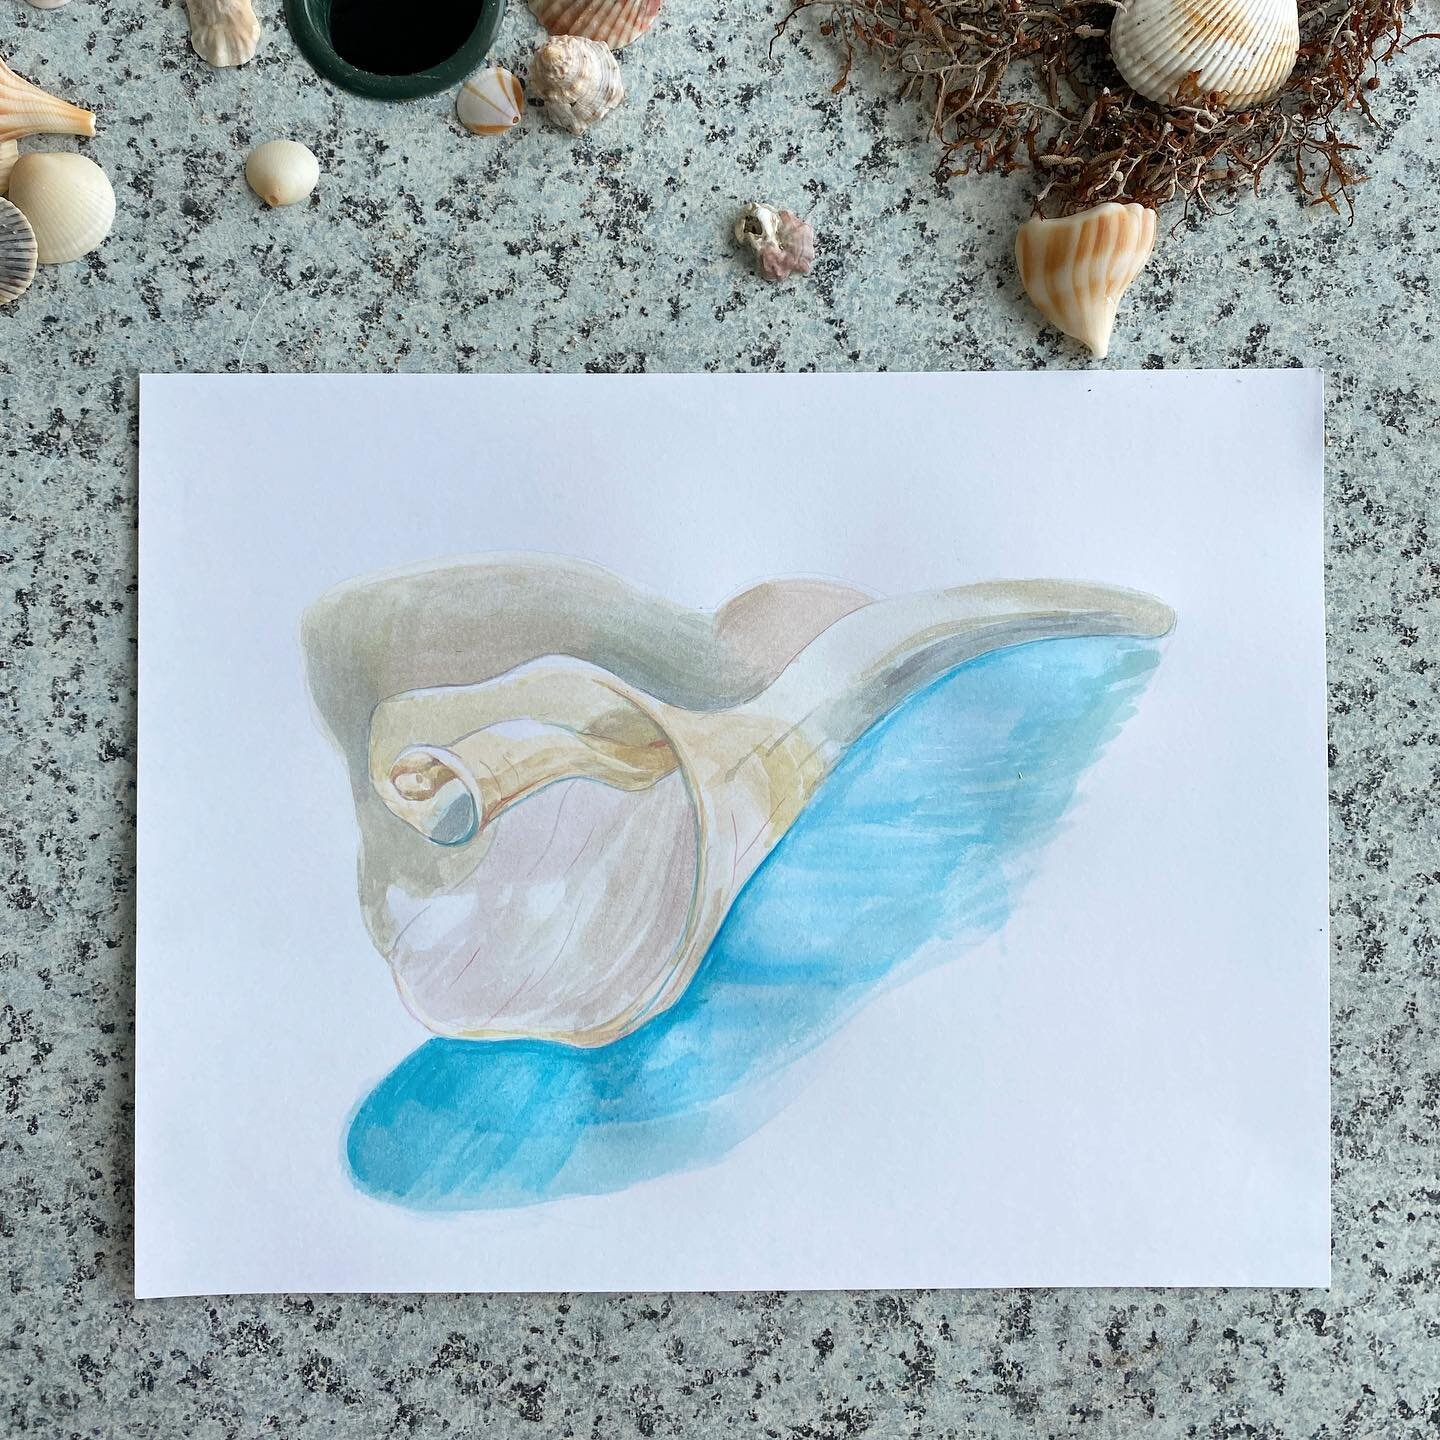 Last day at the beach. Tomorrow it&rsquo;ll probably be back to plants, but today I&rsquo;m enjoying my shell painting.